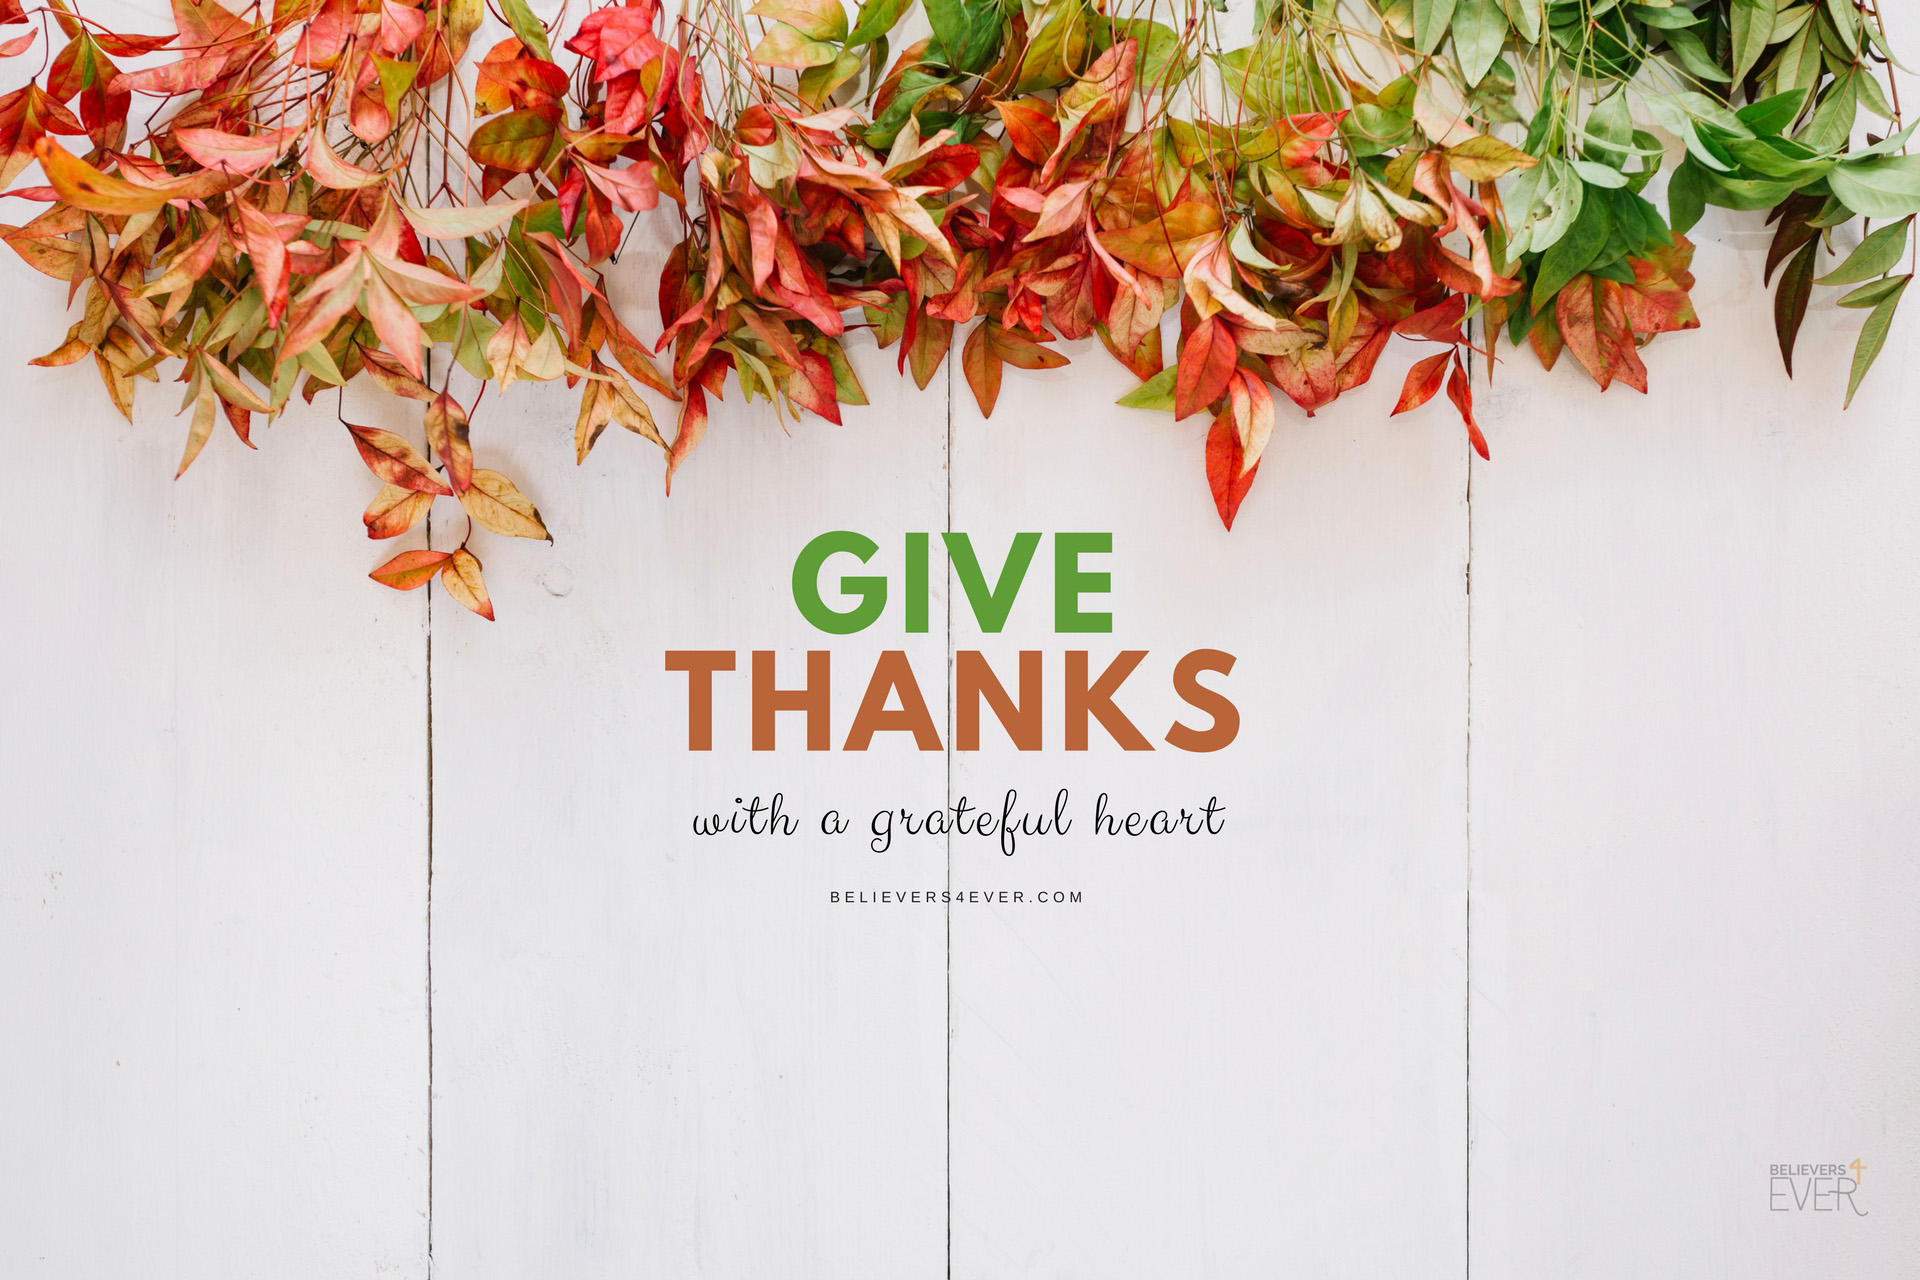 Give thanks with a grateful heart   Believers4evercom